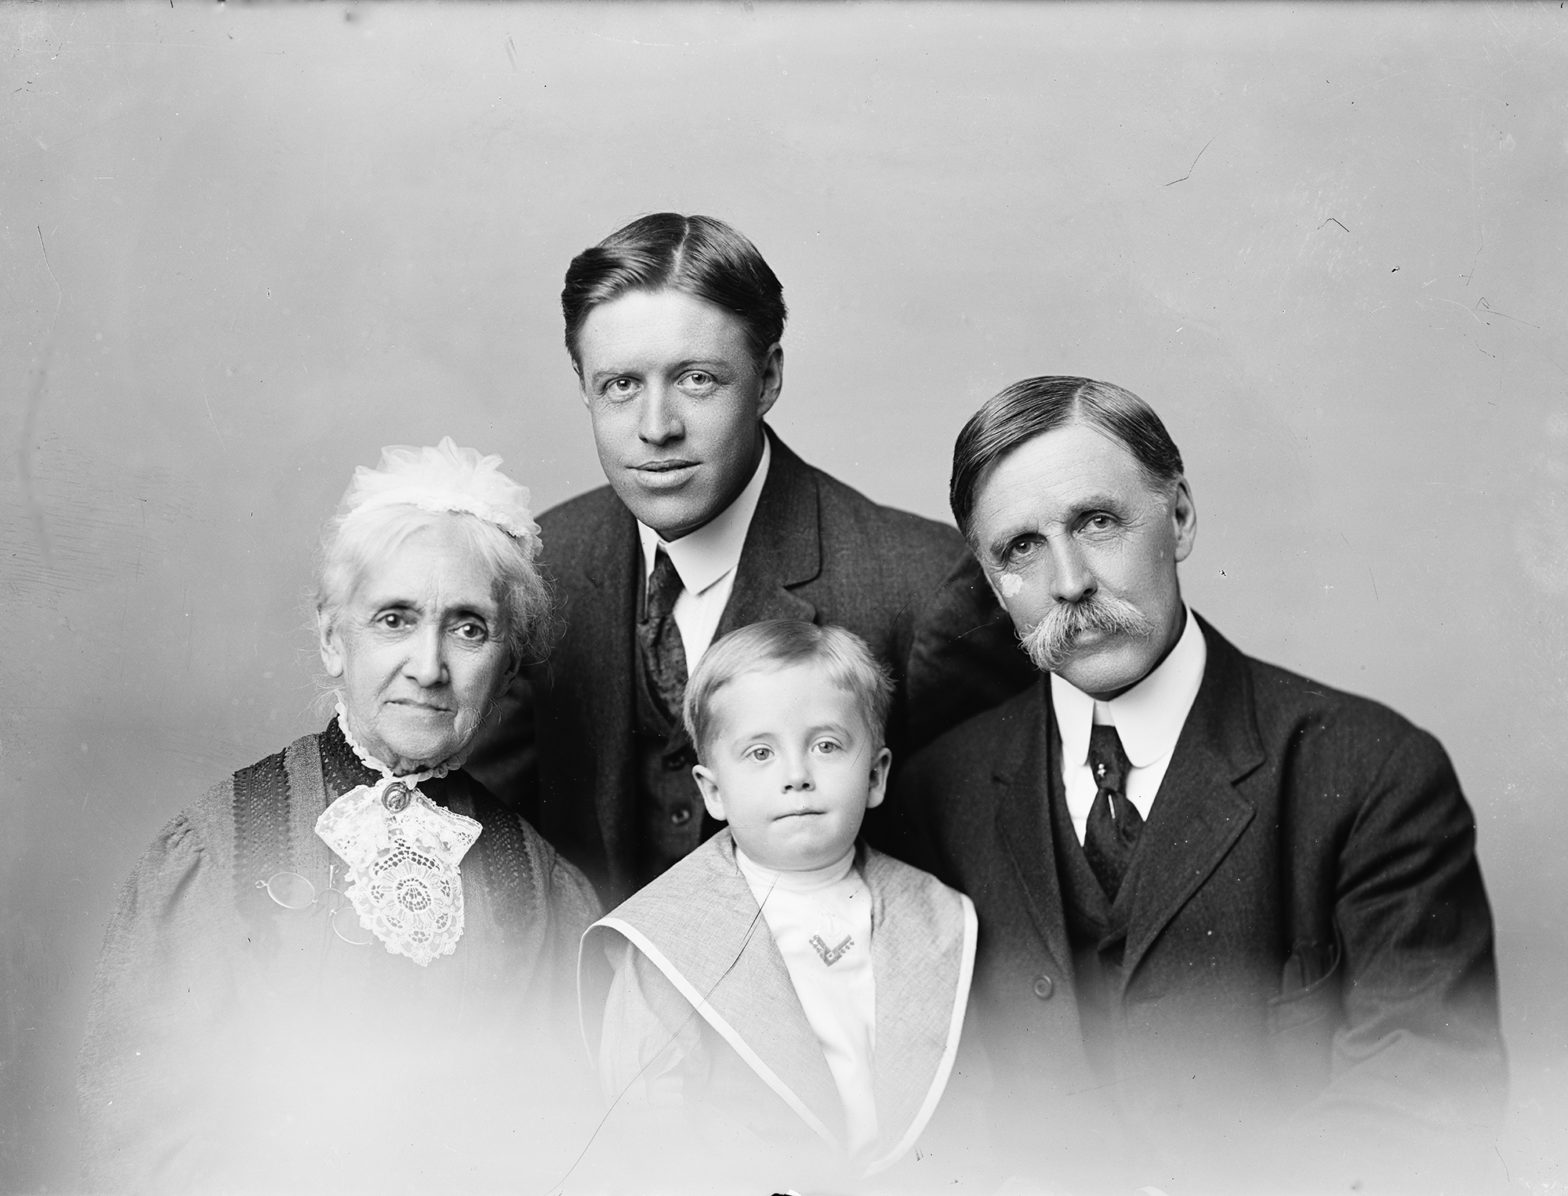 William Henry Jackson with his mother and sons in a family portrait, c. 1910